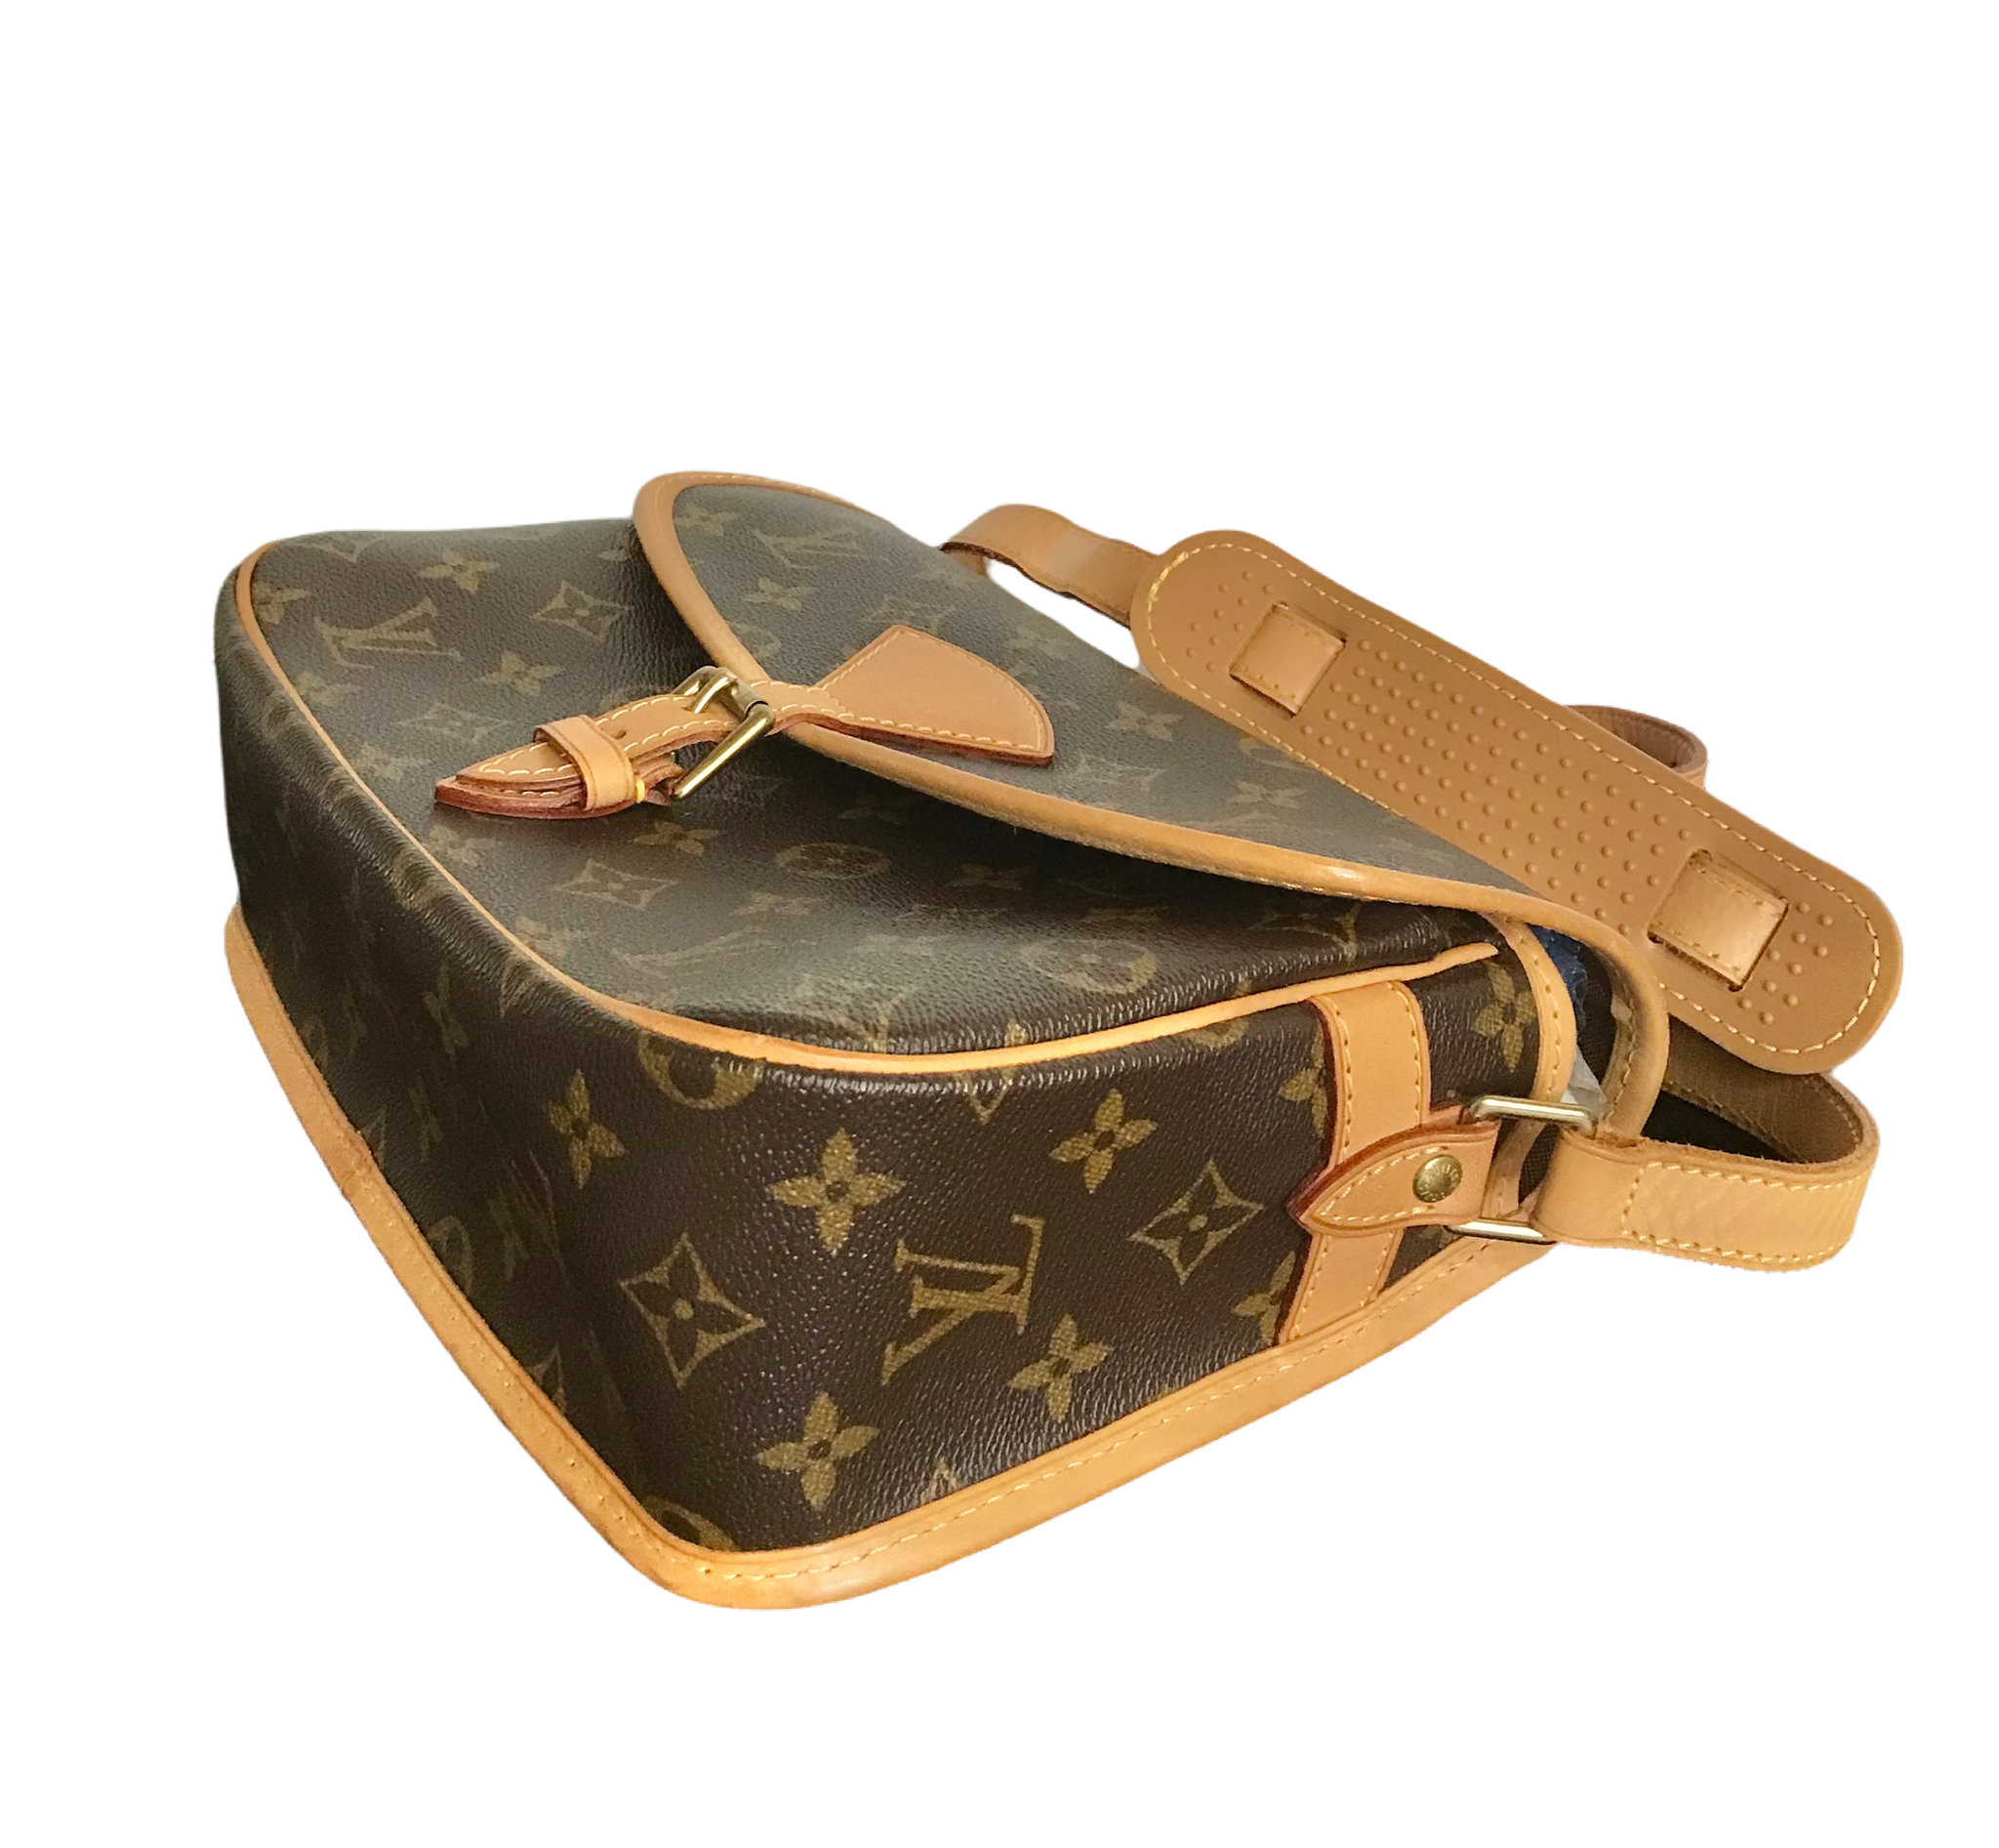 Louis Vuitton Sologne Crossbody JUST IN! Call/text us at